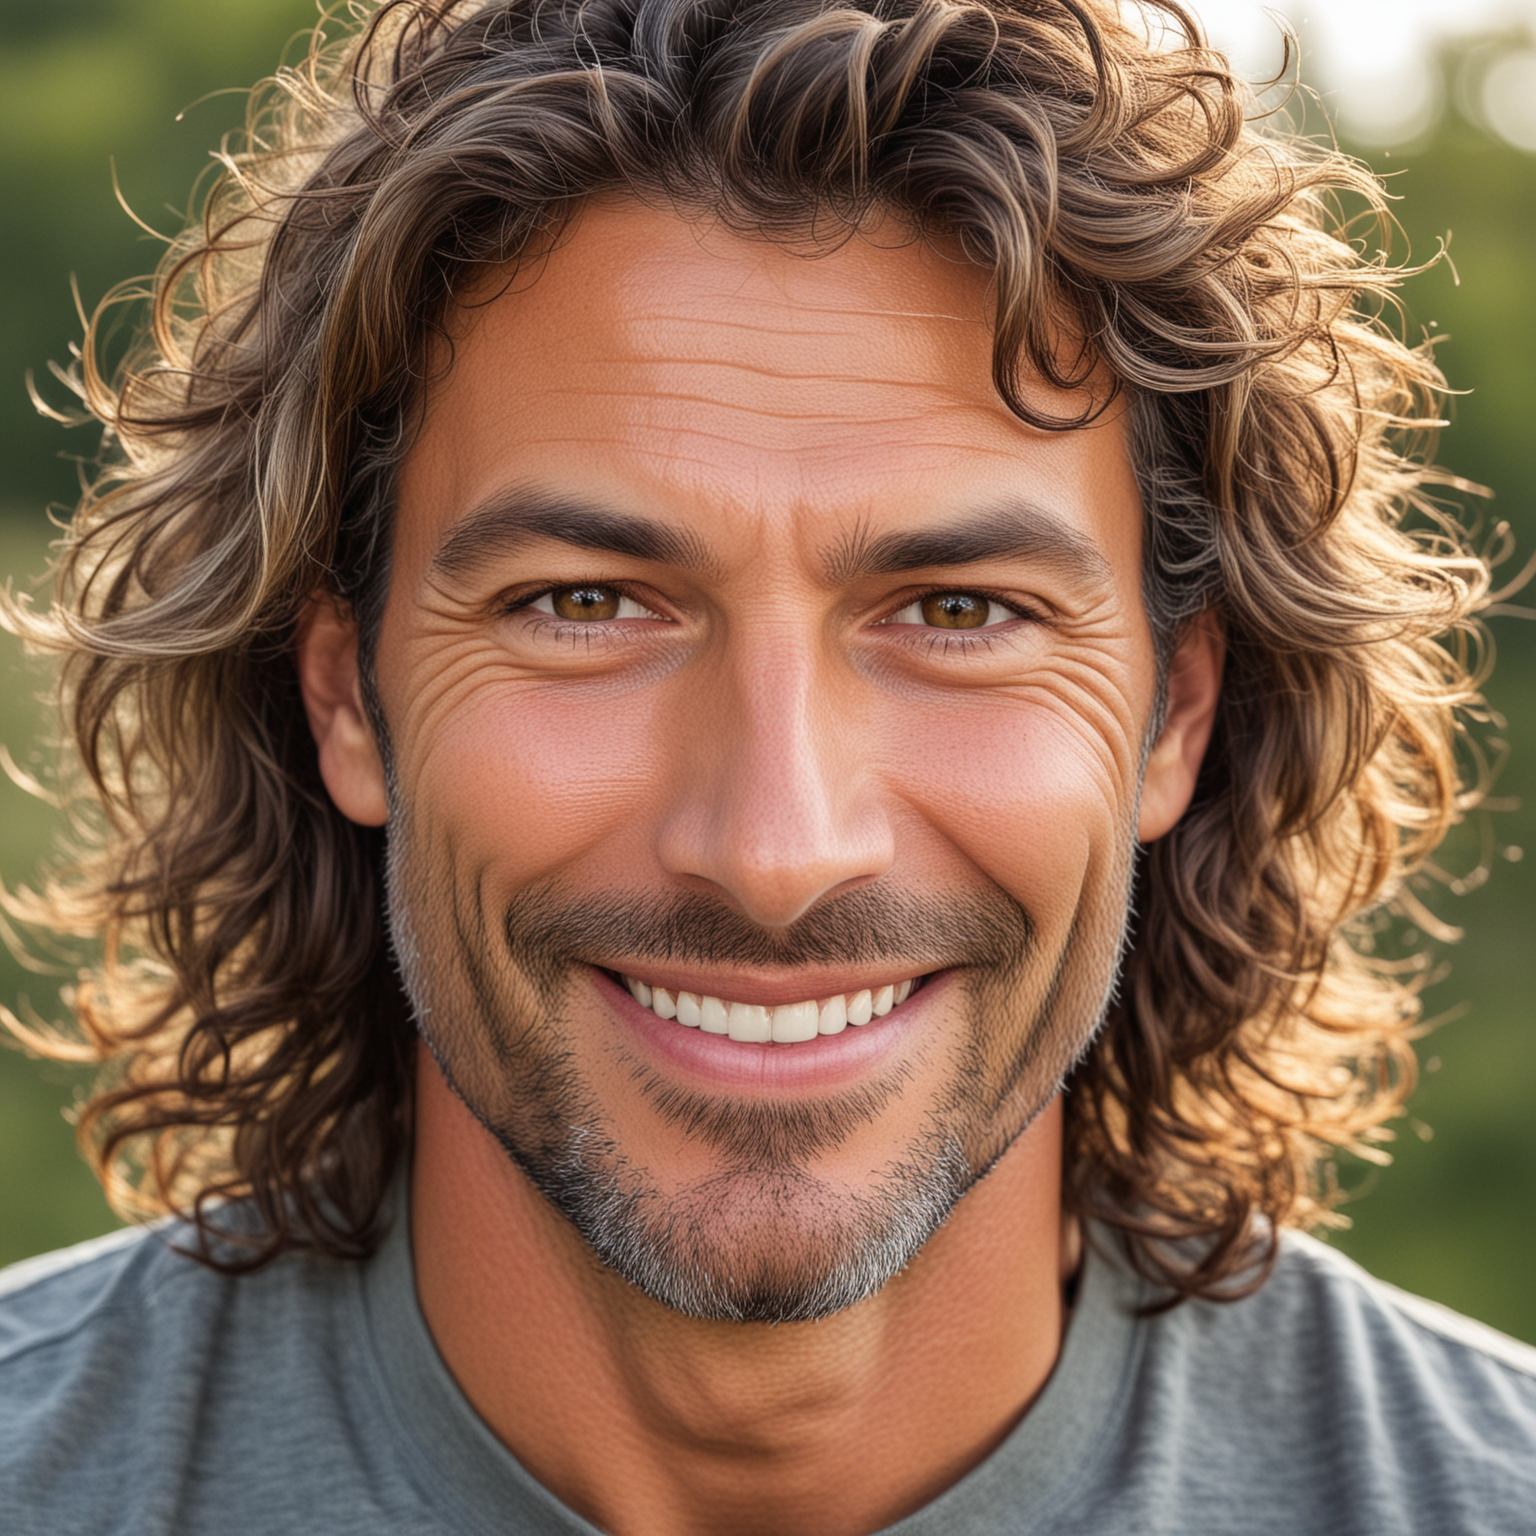 Warm Portrait of a Kind 46YearOld Man with Wavy Hair and Gentle Smile